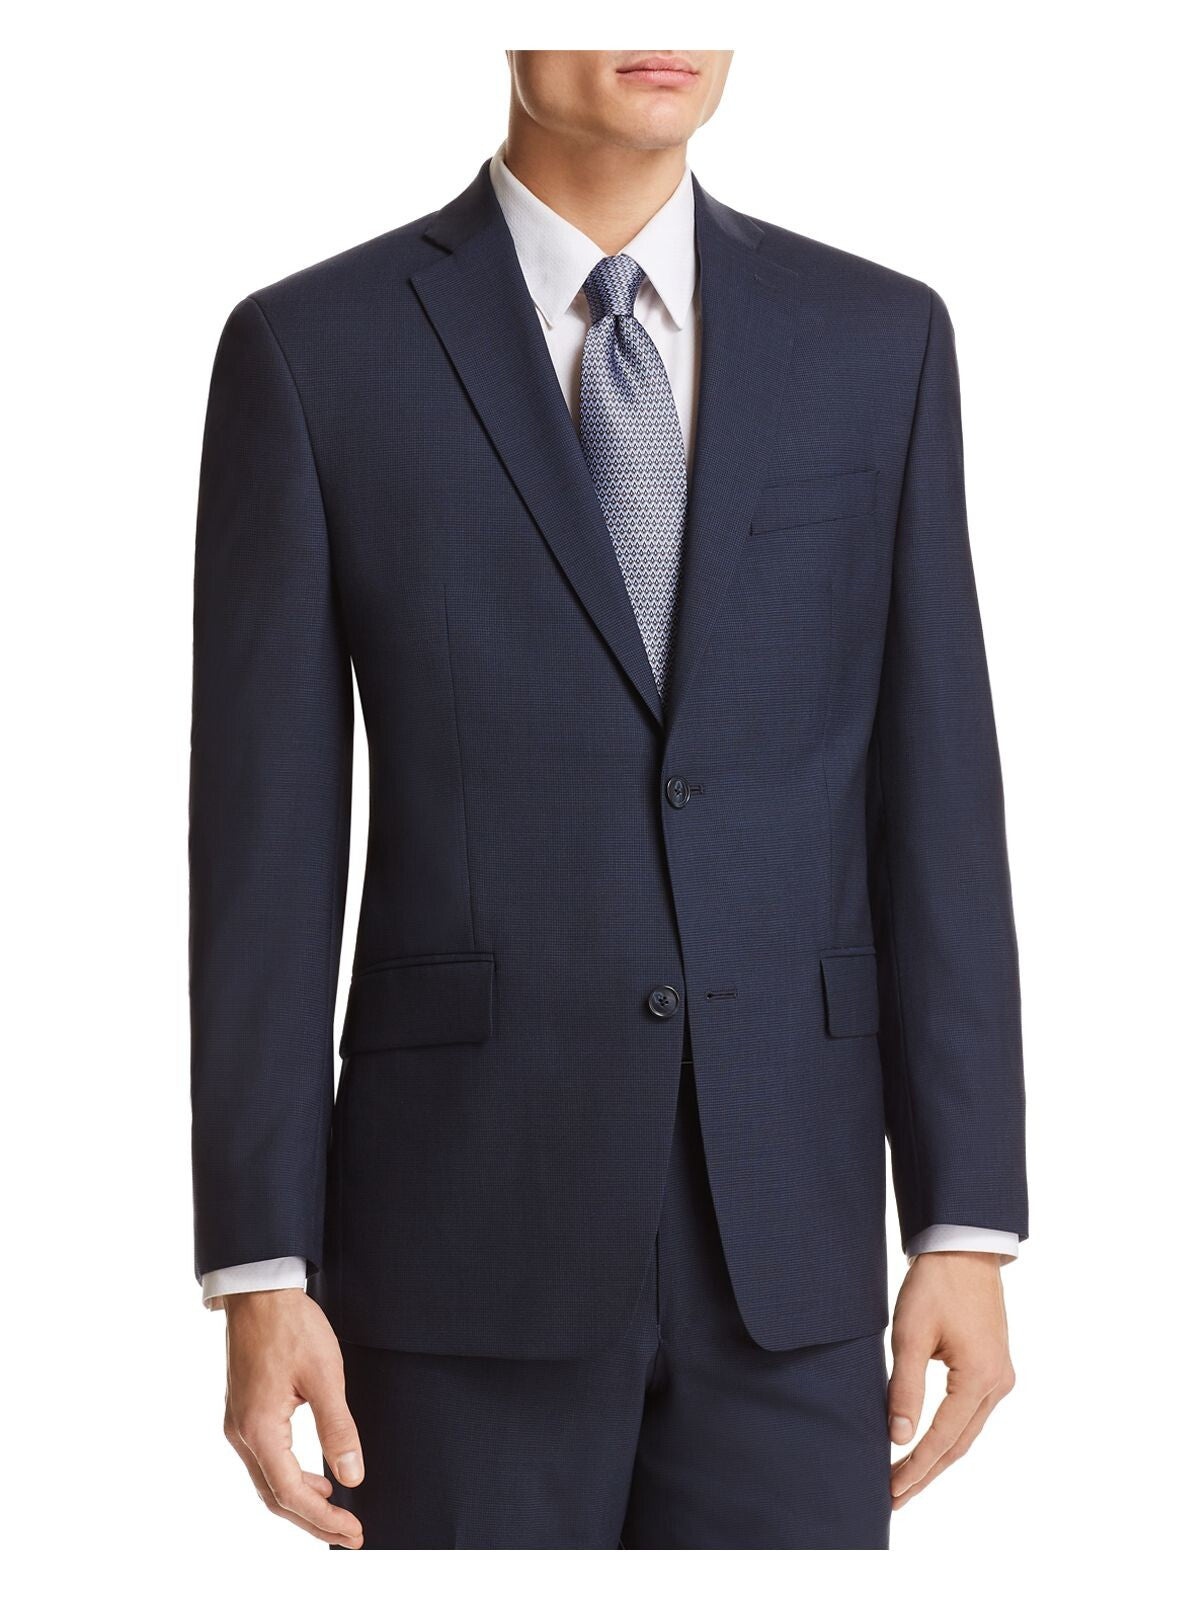 MICHAEL KORS Mens Navy Single Breasted, Stretch, Classic Fit Wool Blend Suit Separate Blazer Jacket 38R